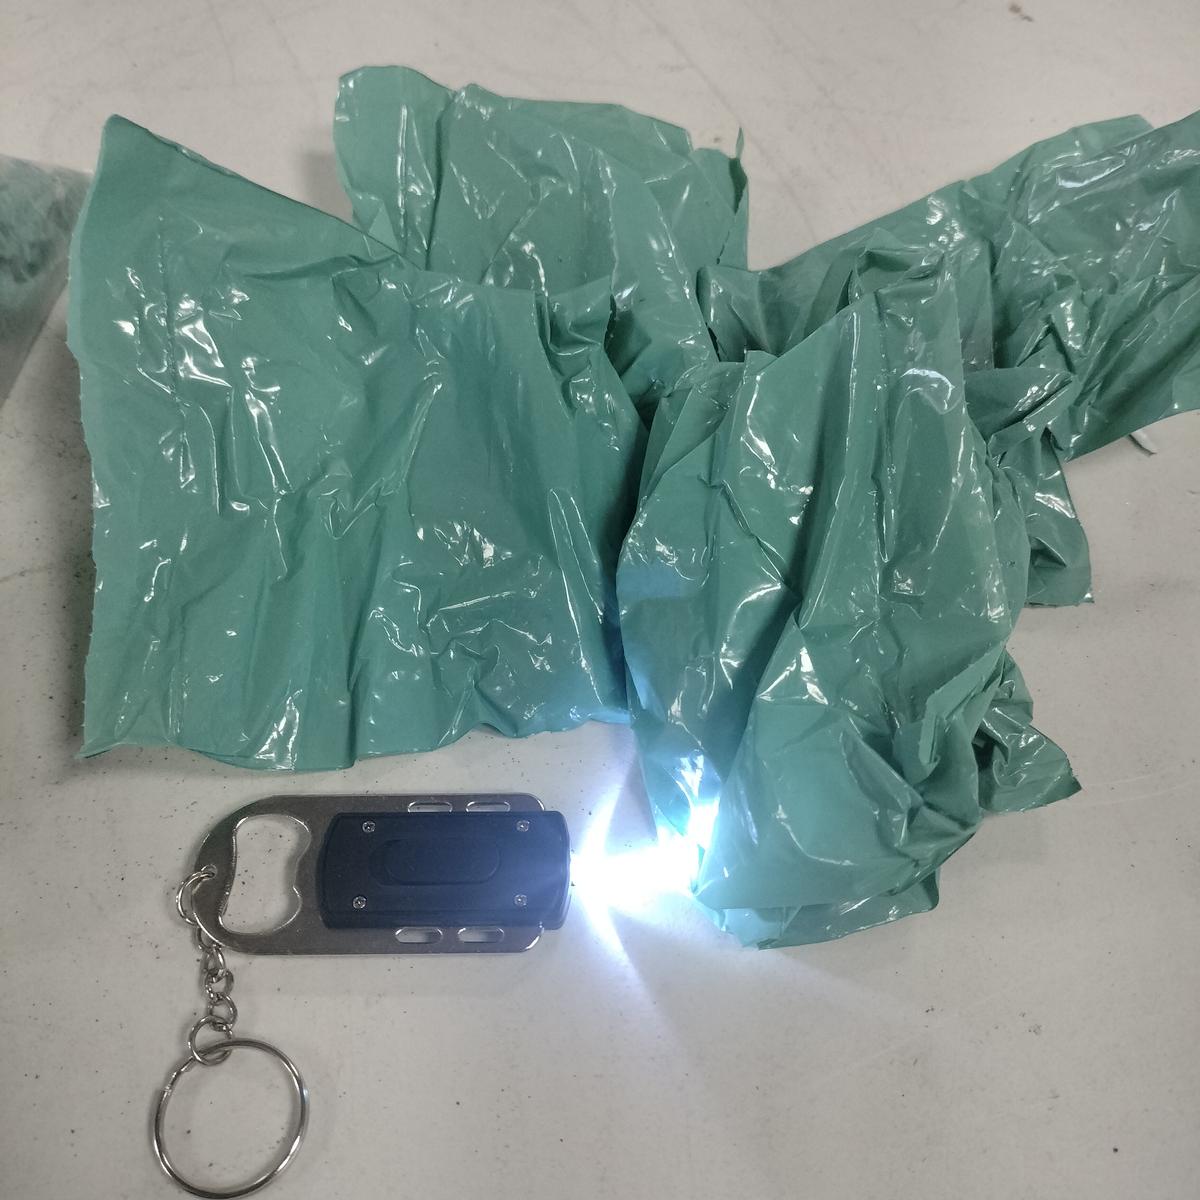 Flashlight Keychains in Package